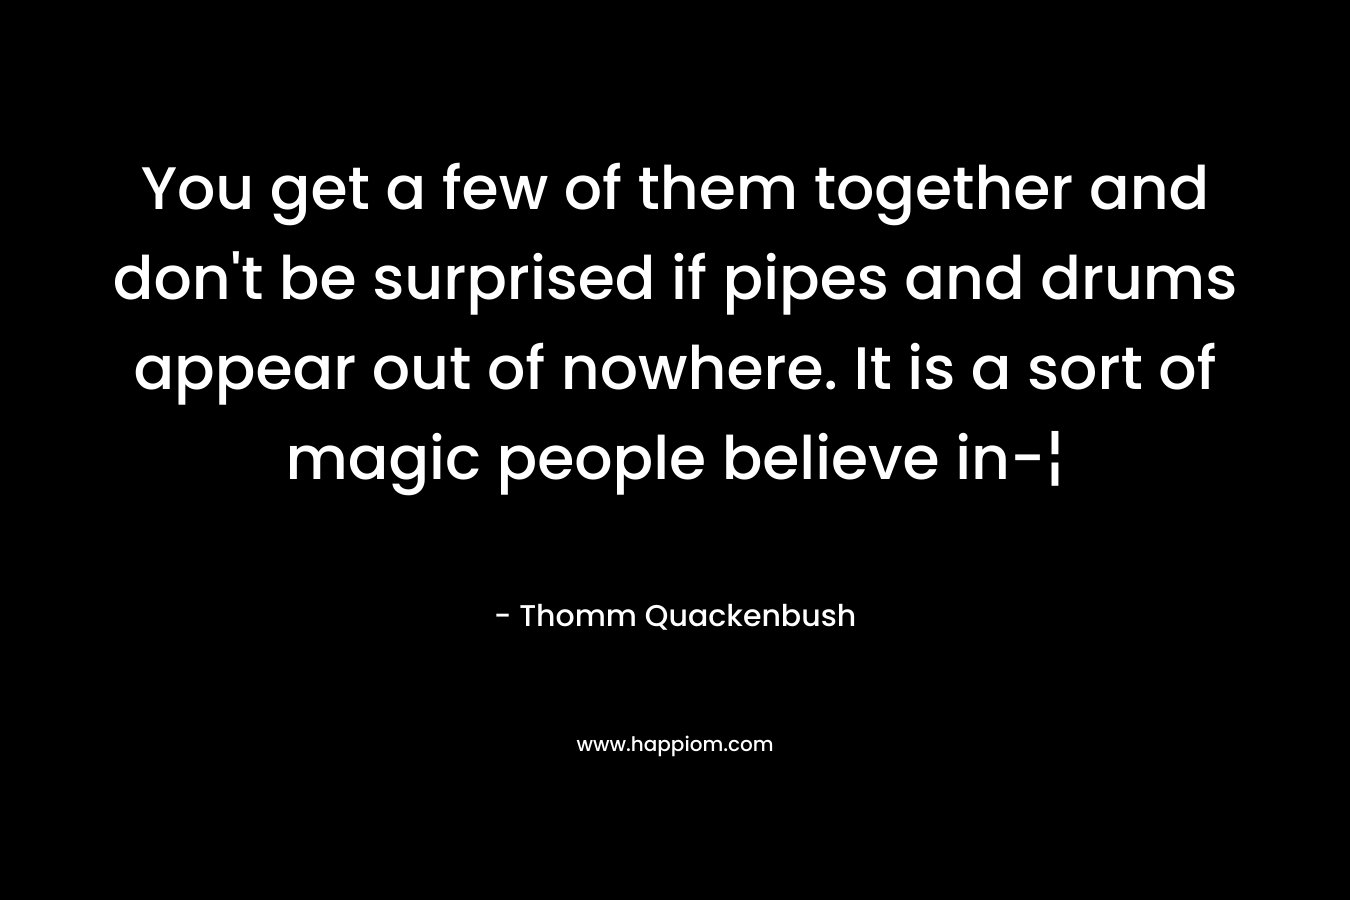 You get a few of them together and don't be surprised if pipes and drums appear out of nowhere. It is a sort of magic people believe in-¦